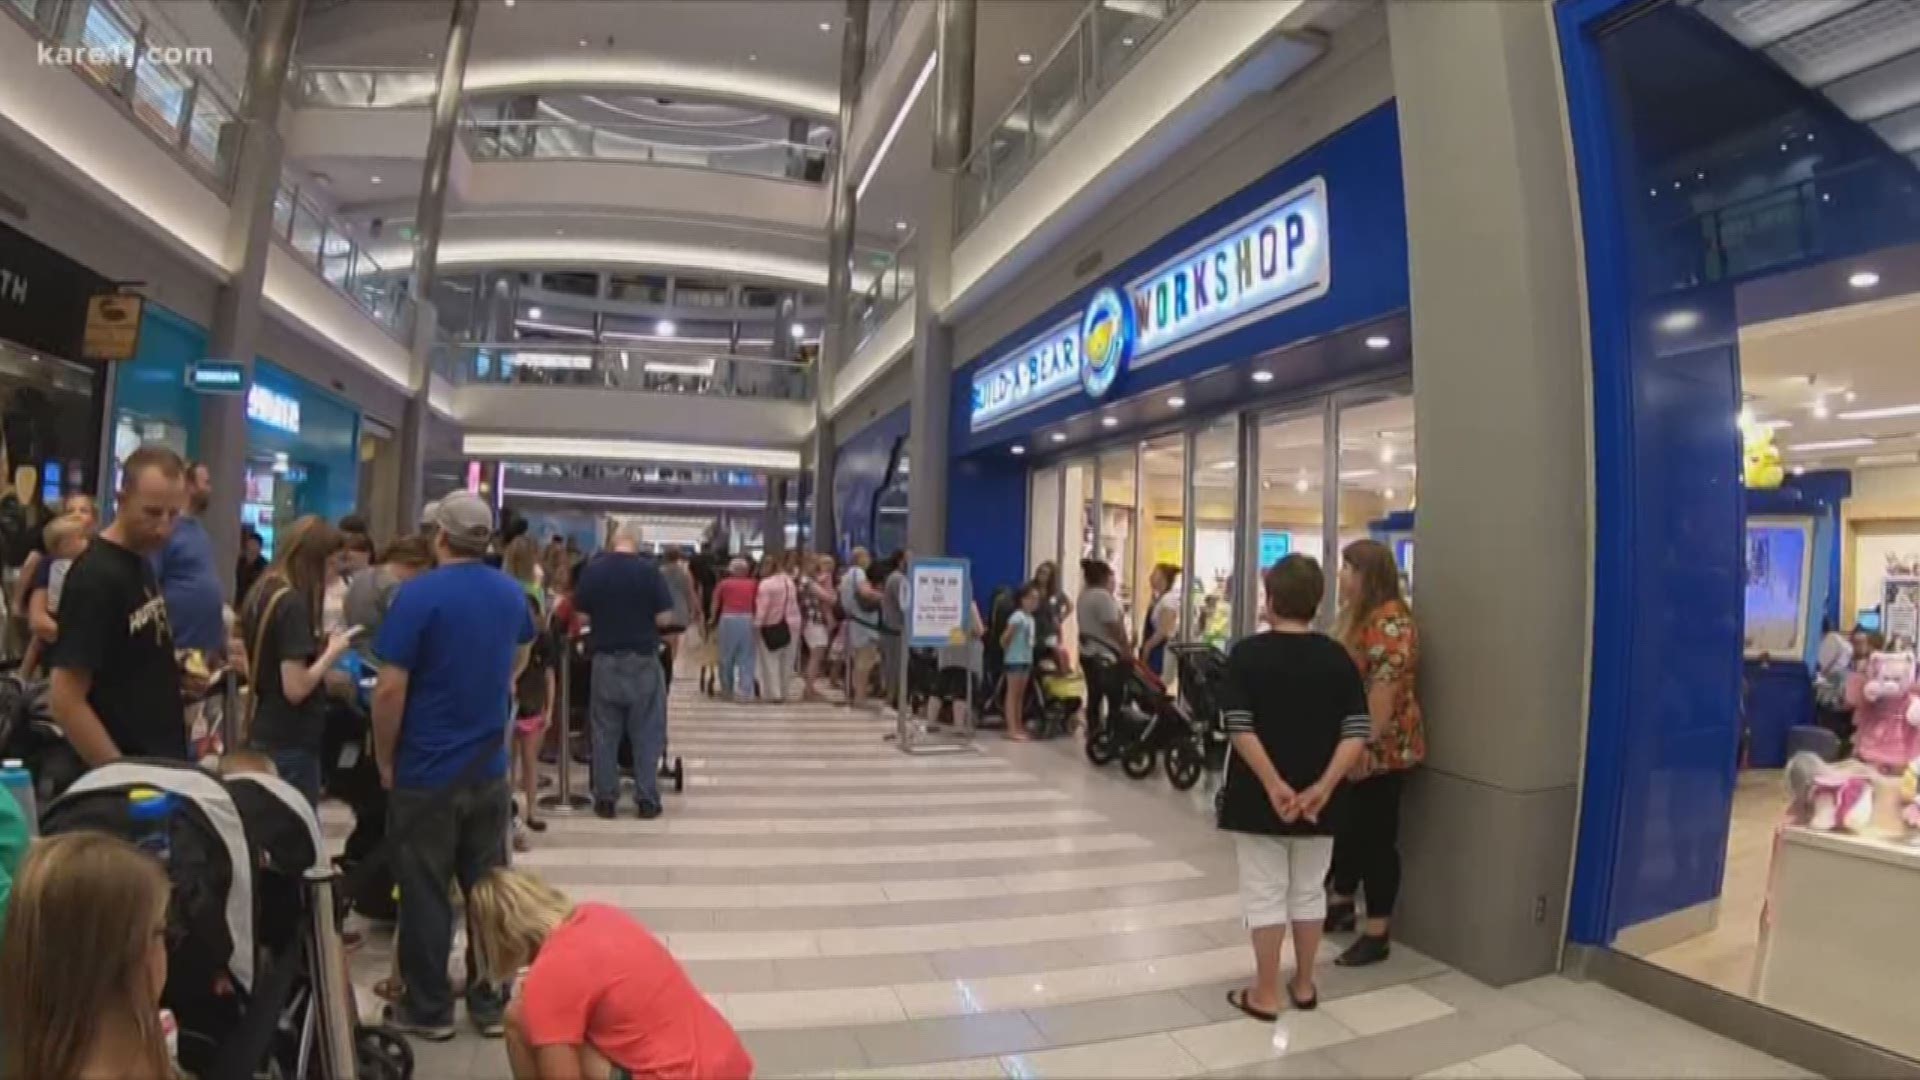 Build-A-Bear 'Pay Your Age' Day: Lines close due to huge demand